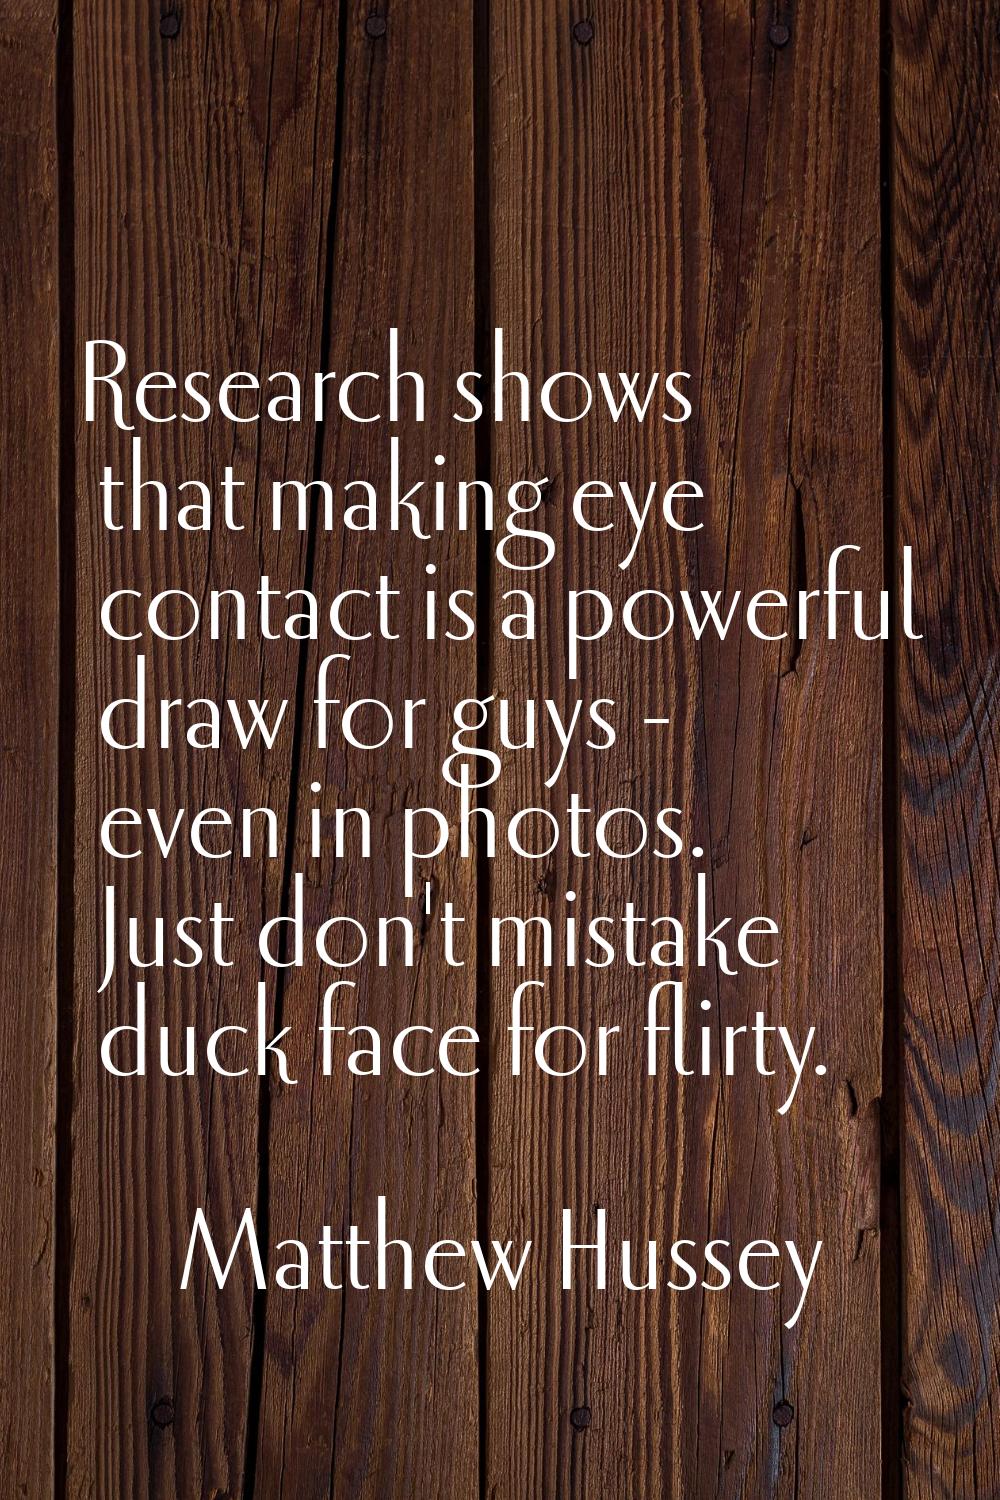 Research shows that making eye contact is a powerful draw for guys - even in photos. Just don't mis